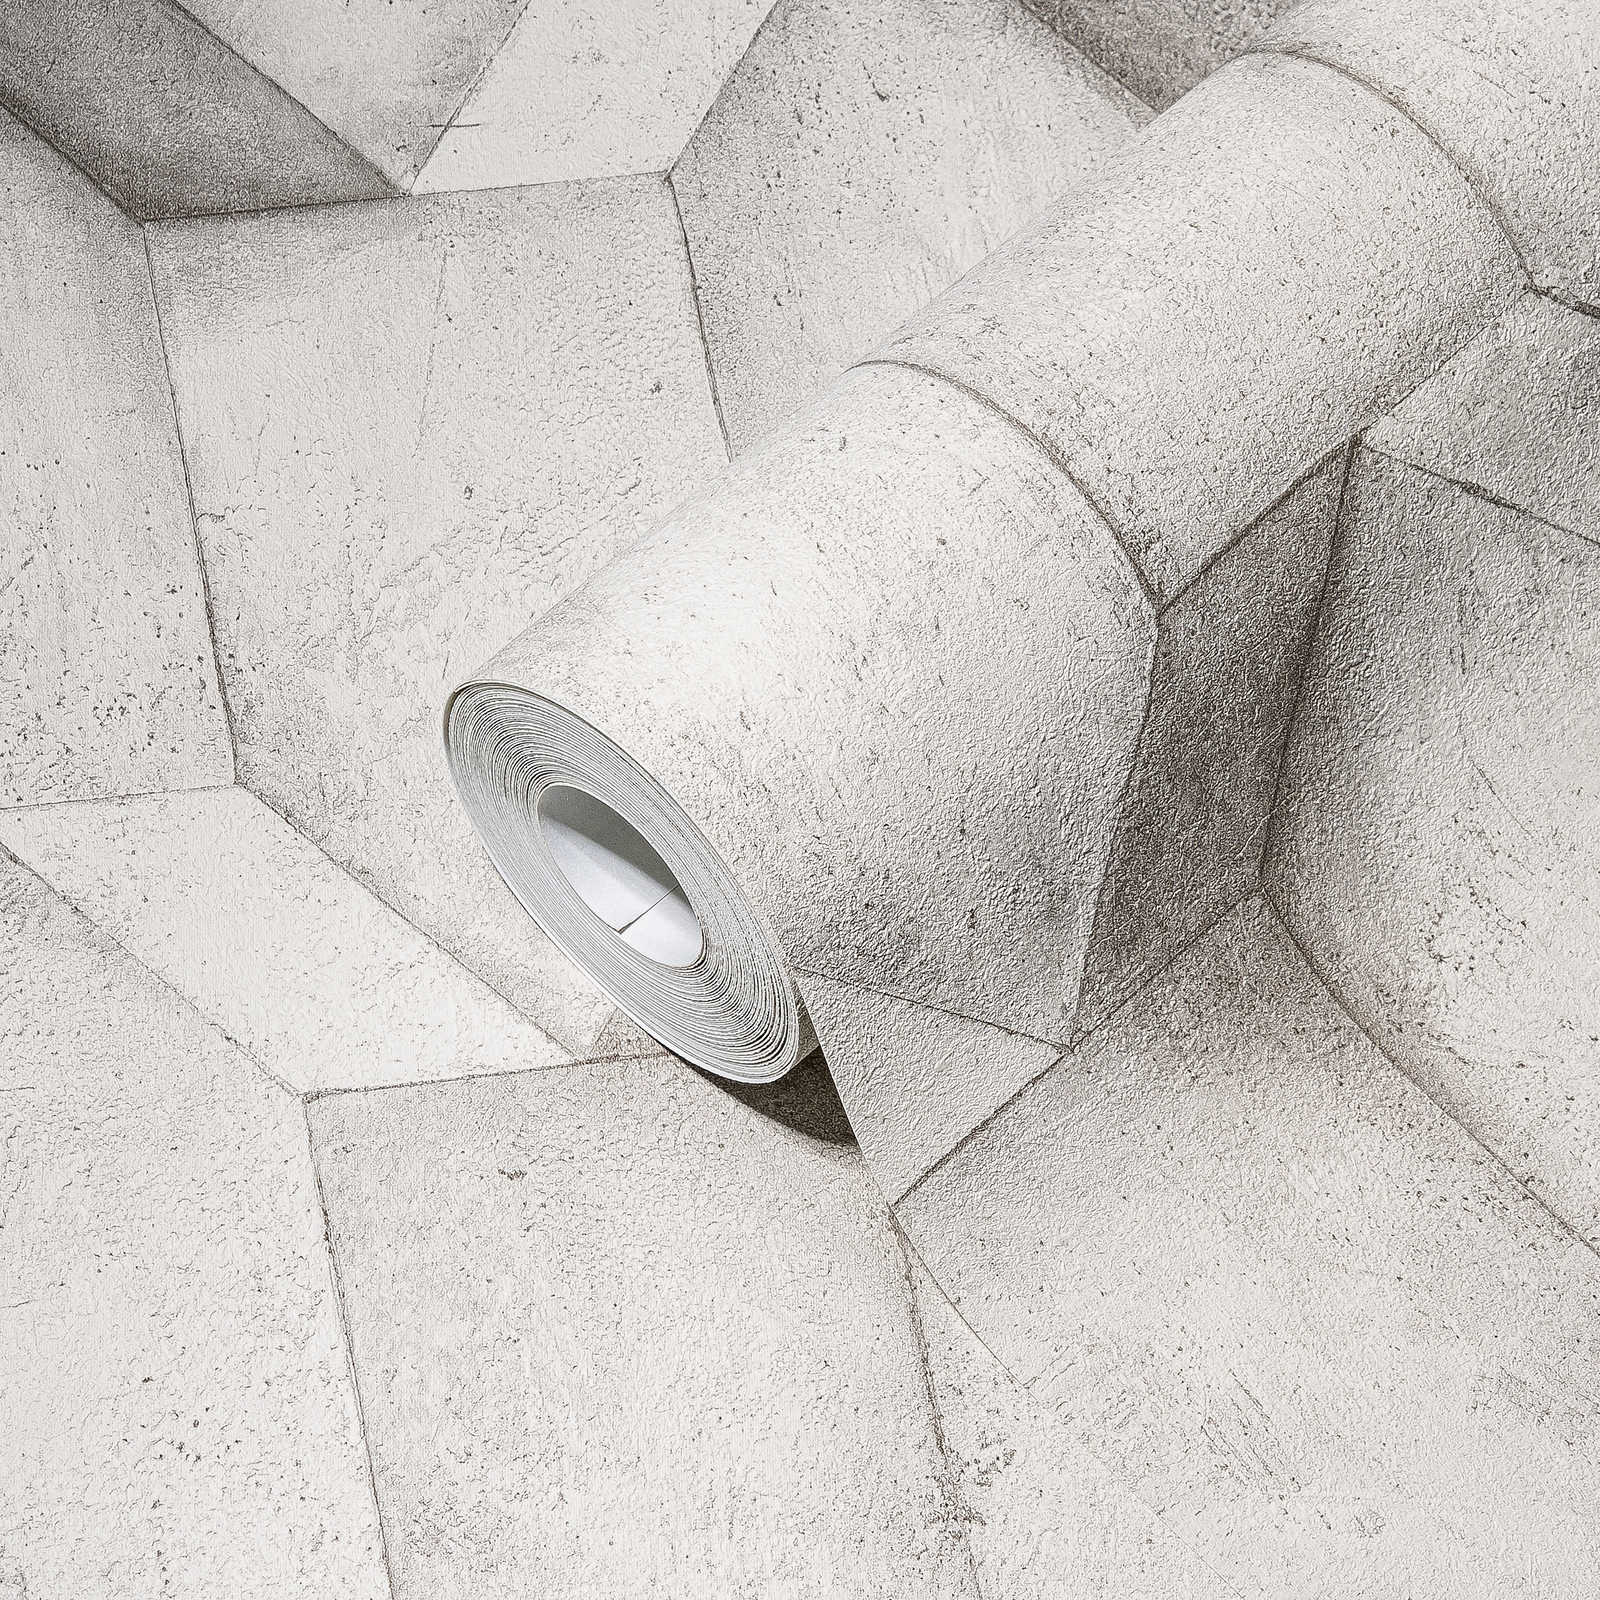             3D wallpaper limestone with structure design - white, grey
        